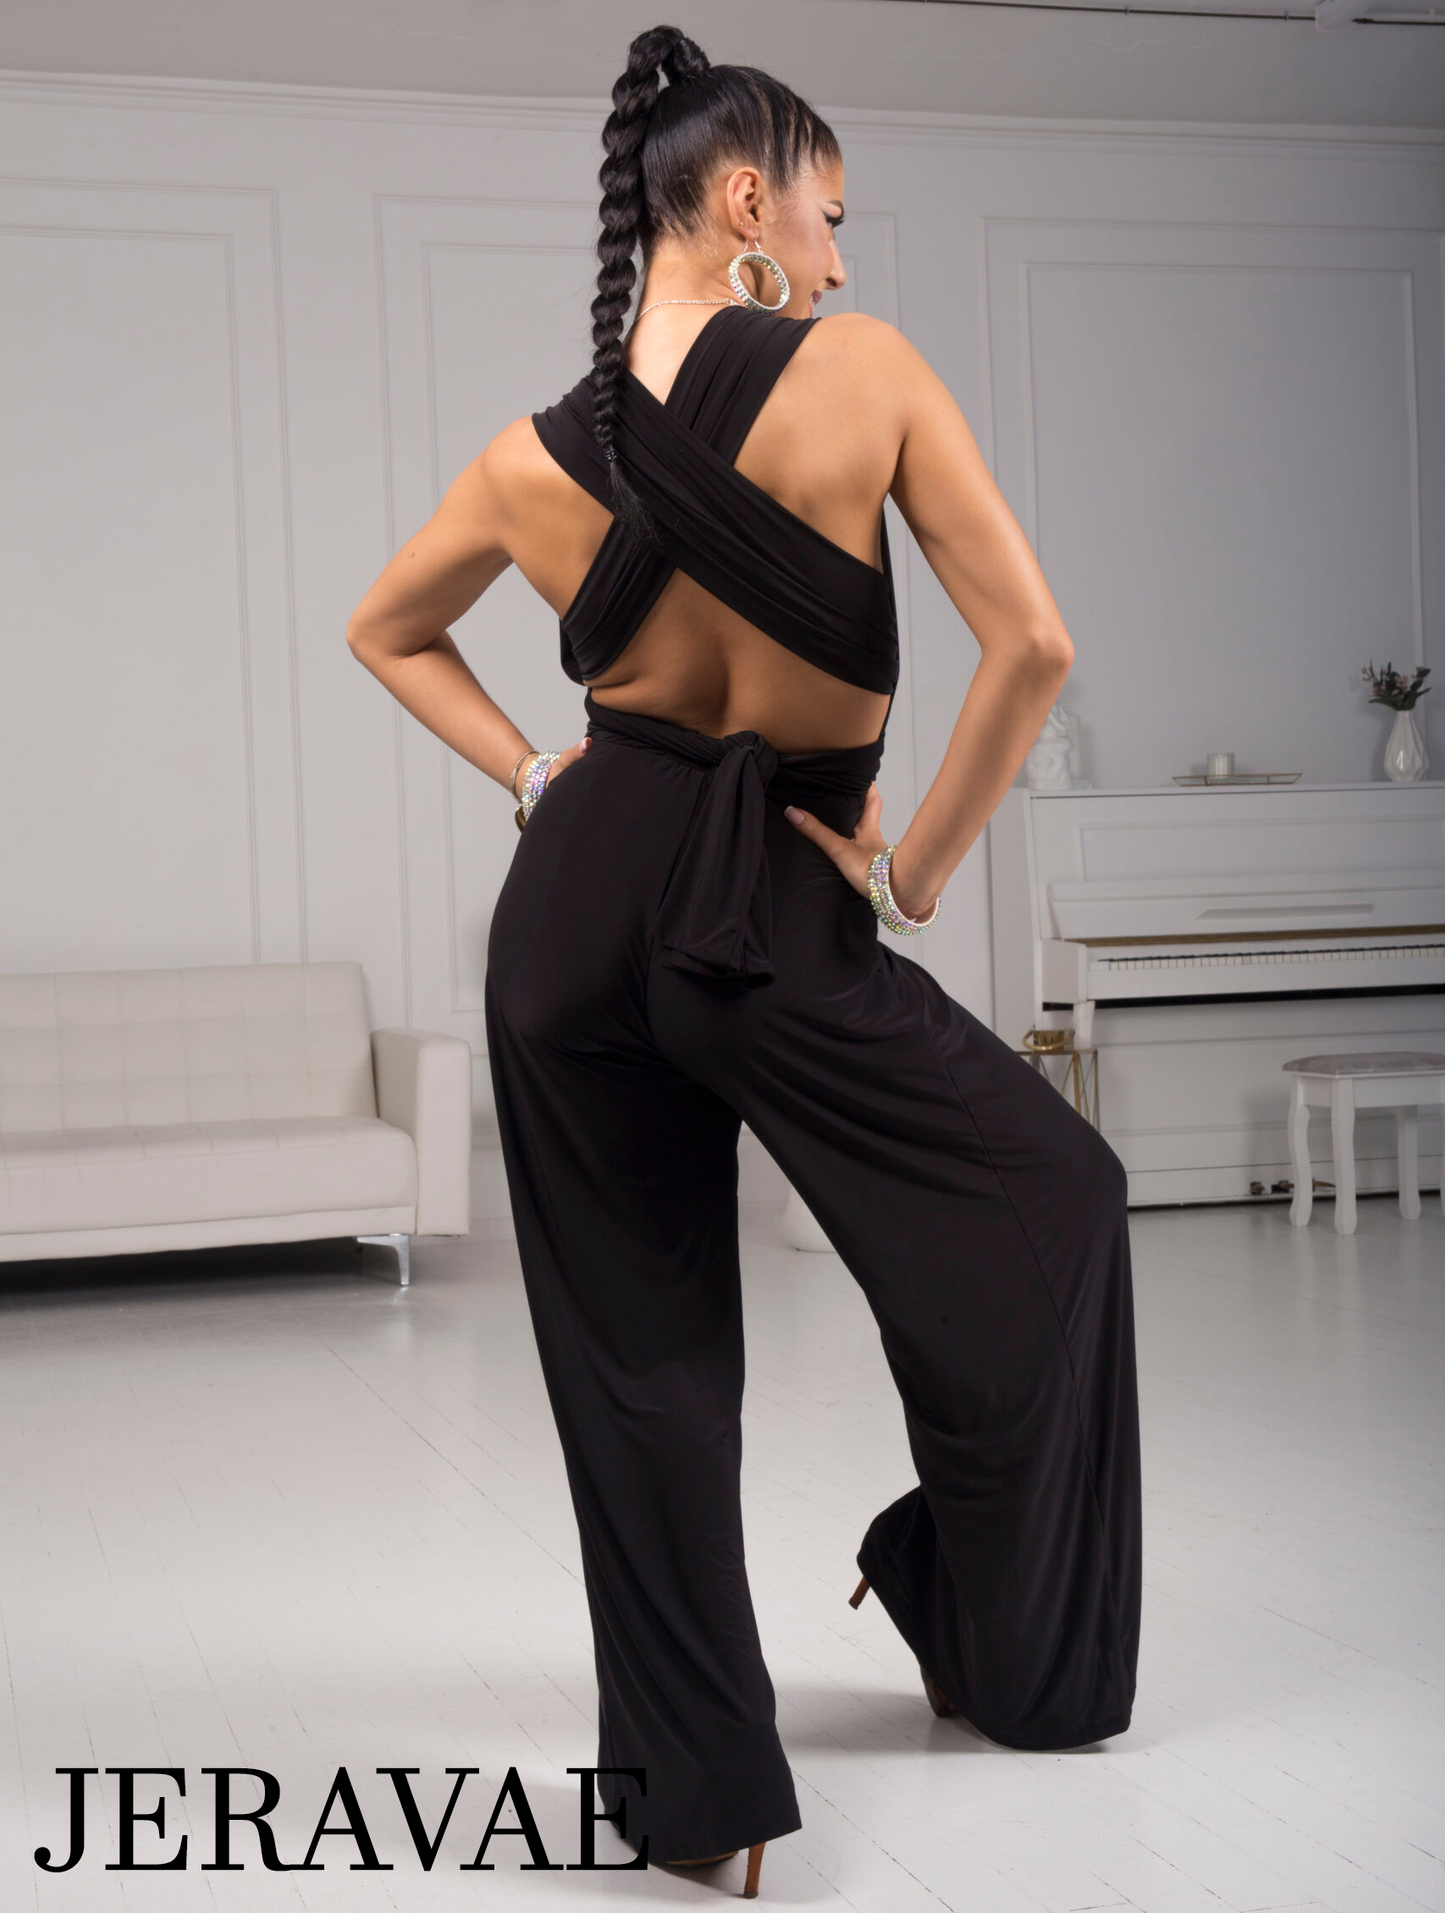 Senga Dancewear CALYPSO One Piece Jumpsuit with Strips of Material to Customize Your Look and Wide Leg Pants Available in Brown and Black PRA 976 in Stock